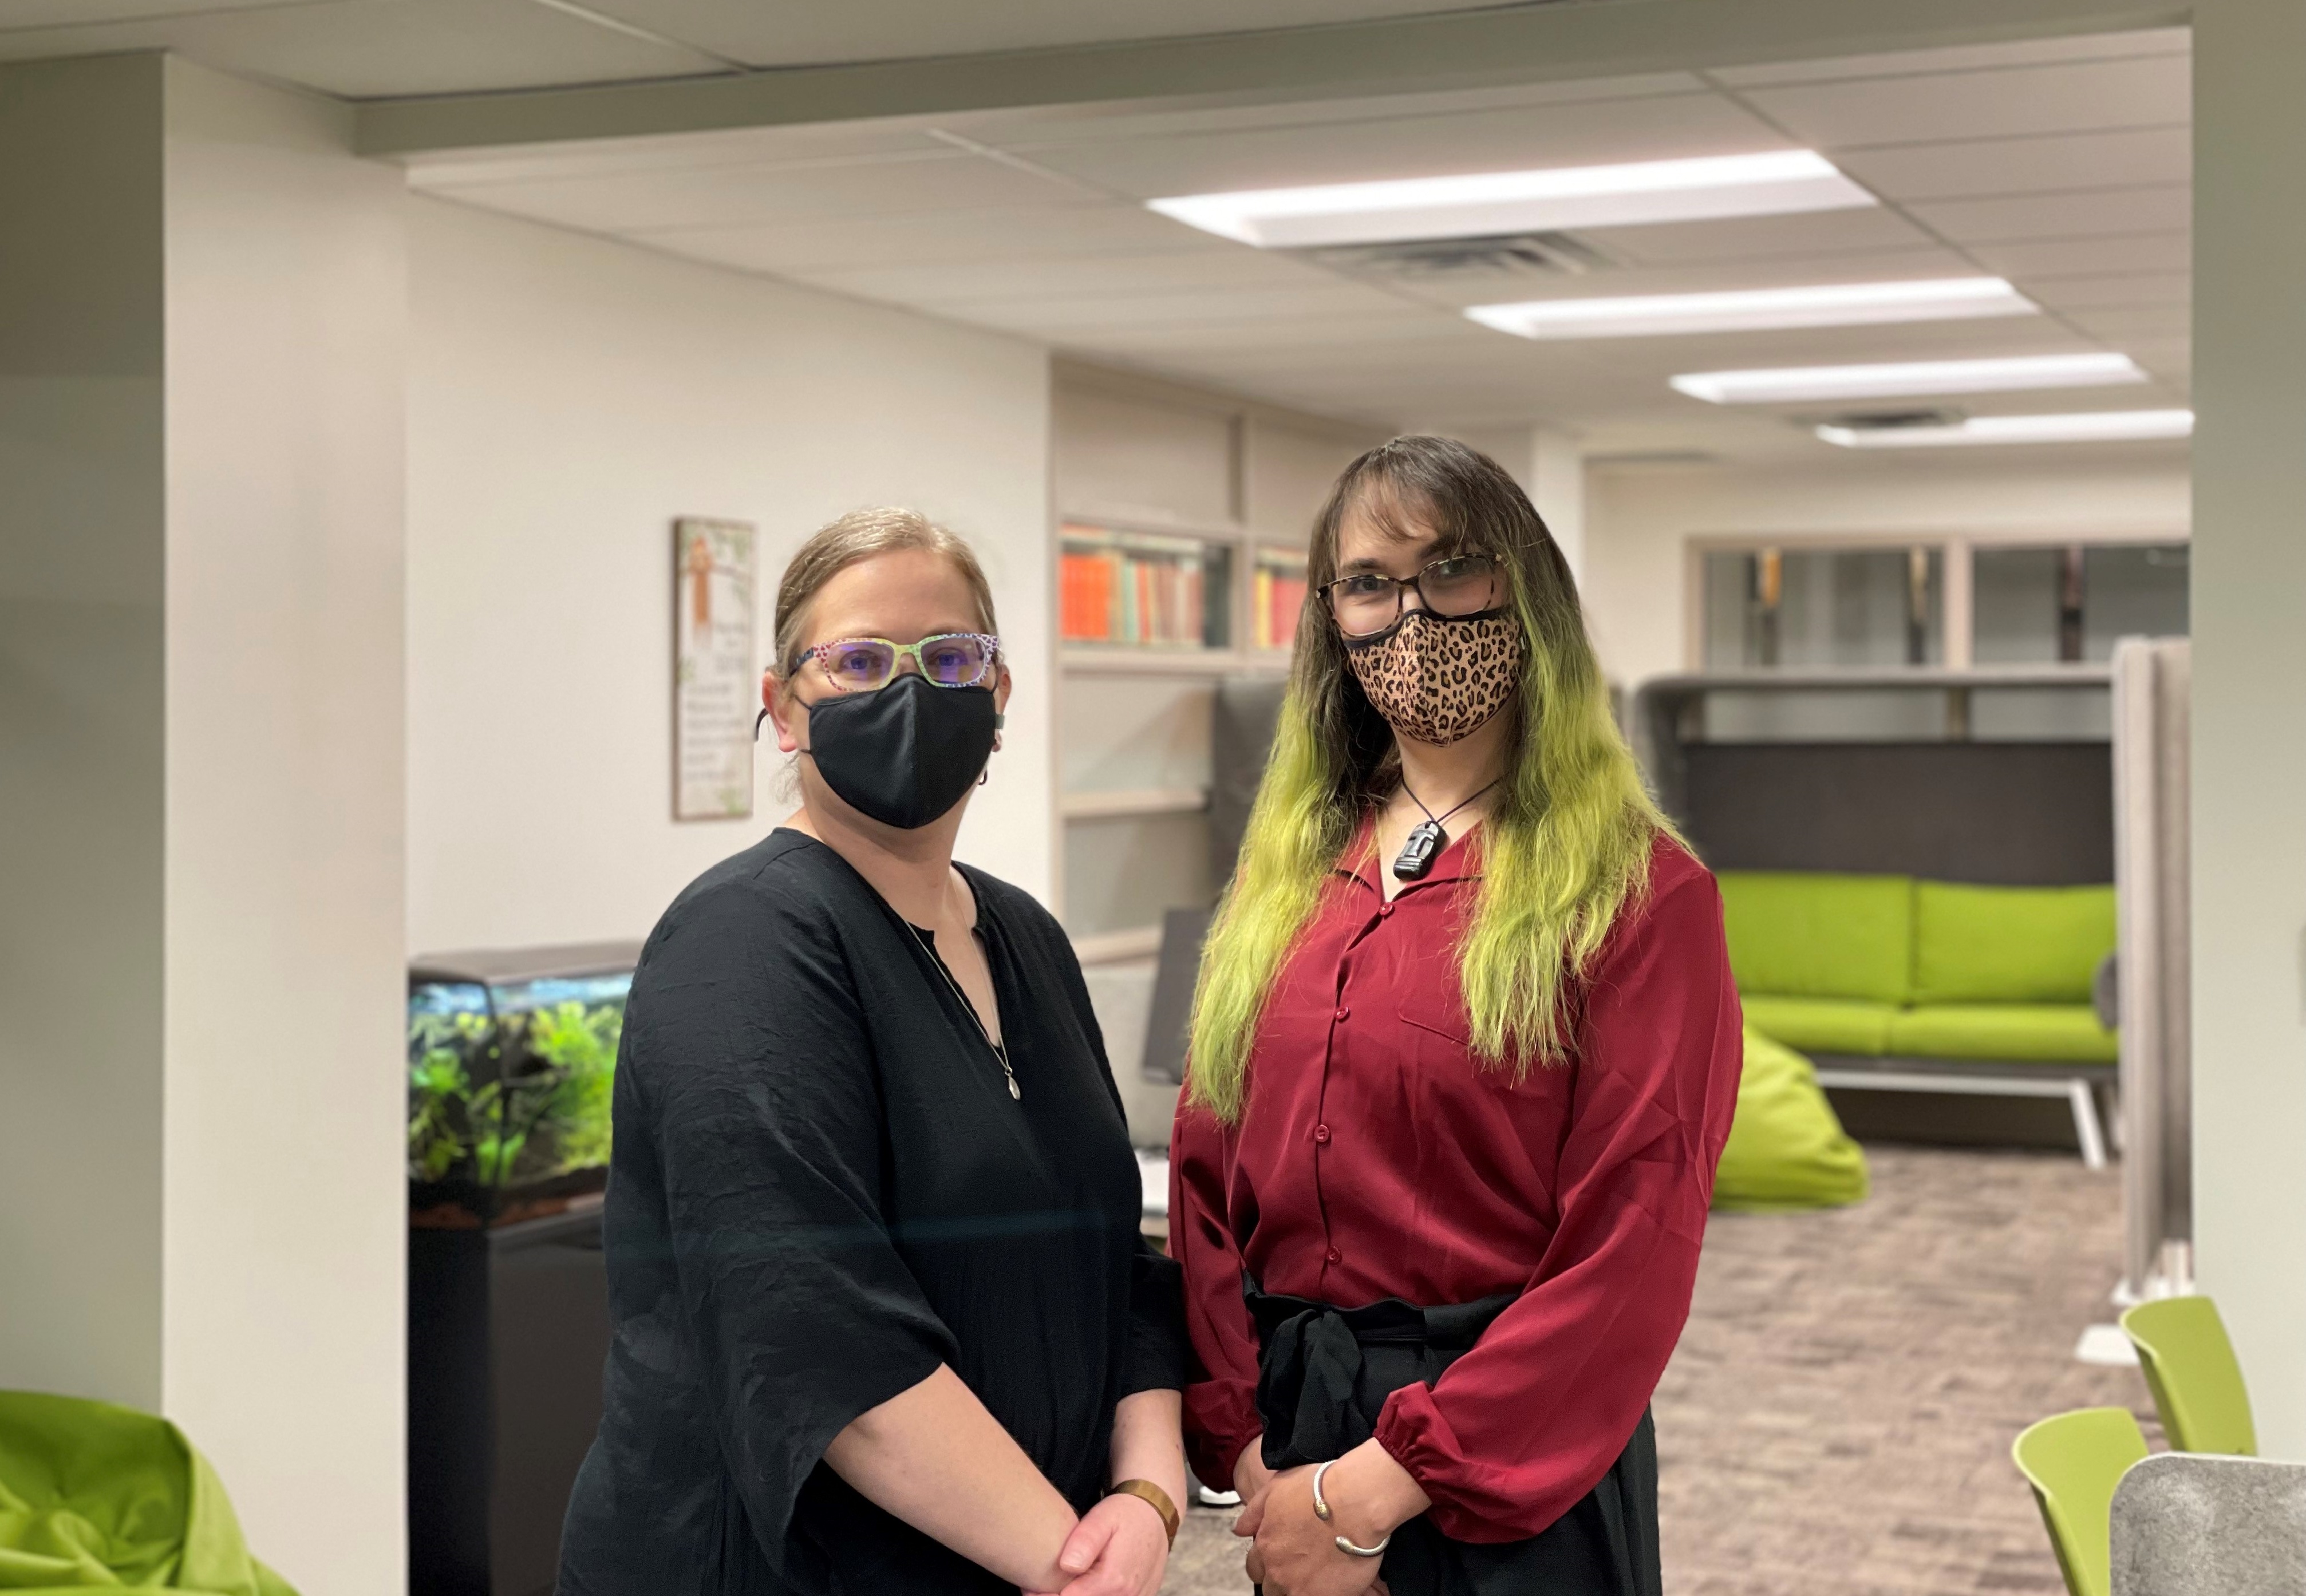 Nancy Waite, coordinator at Library Accessibility Services and Paige Maylott, library accessibility assistant, posing together in the renovated CATS.